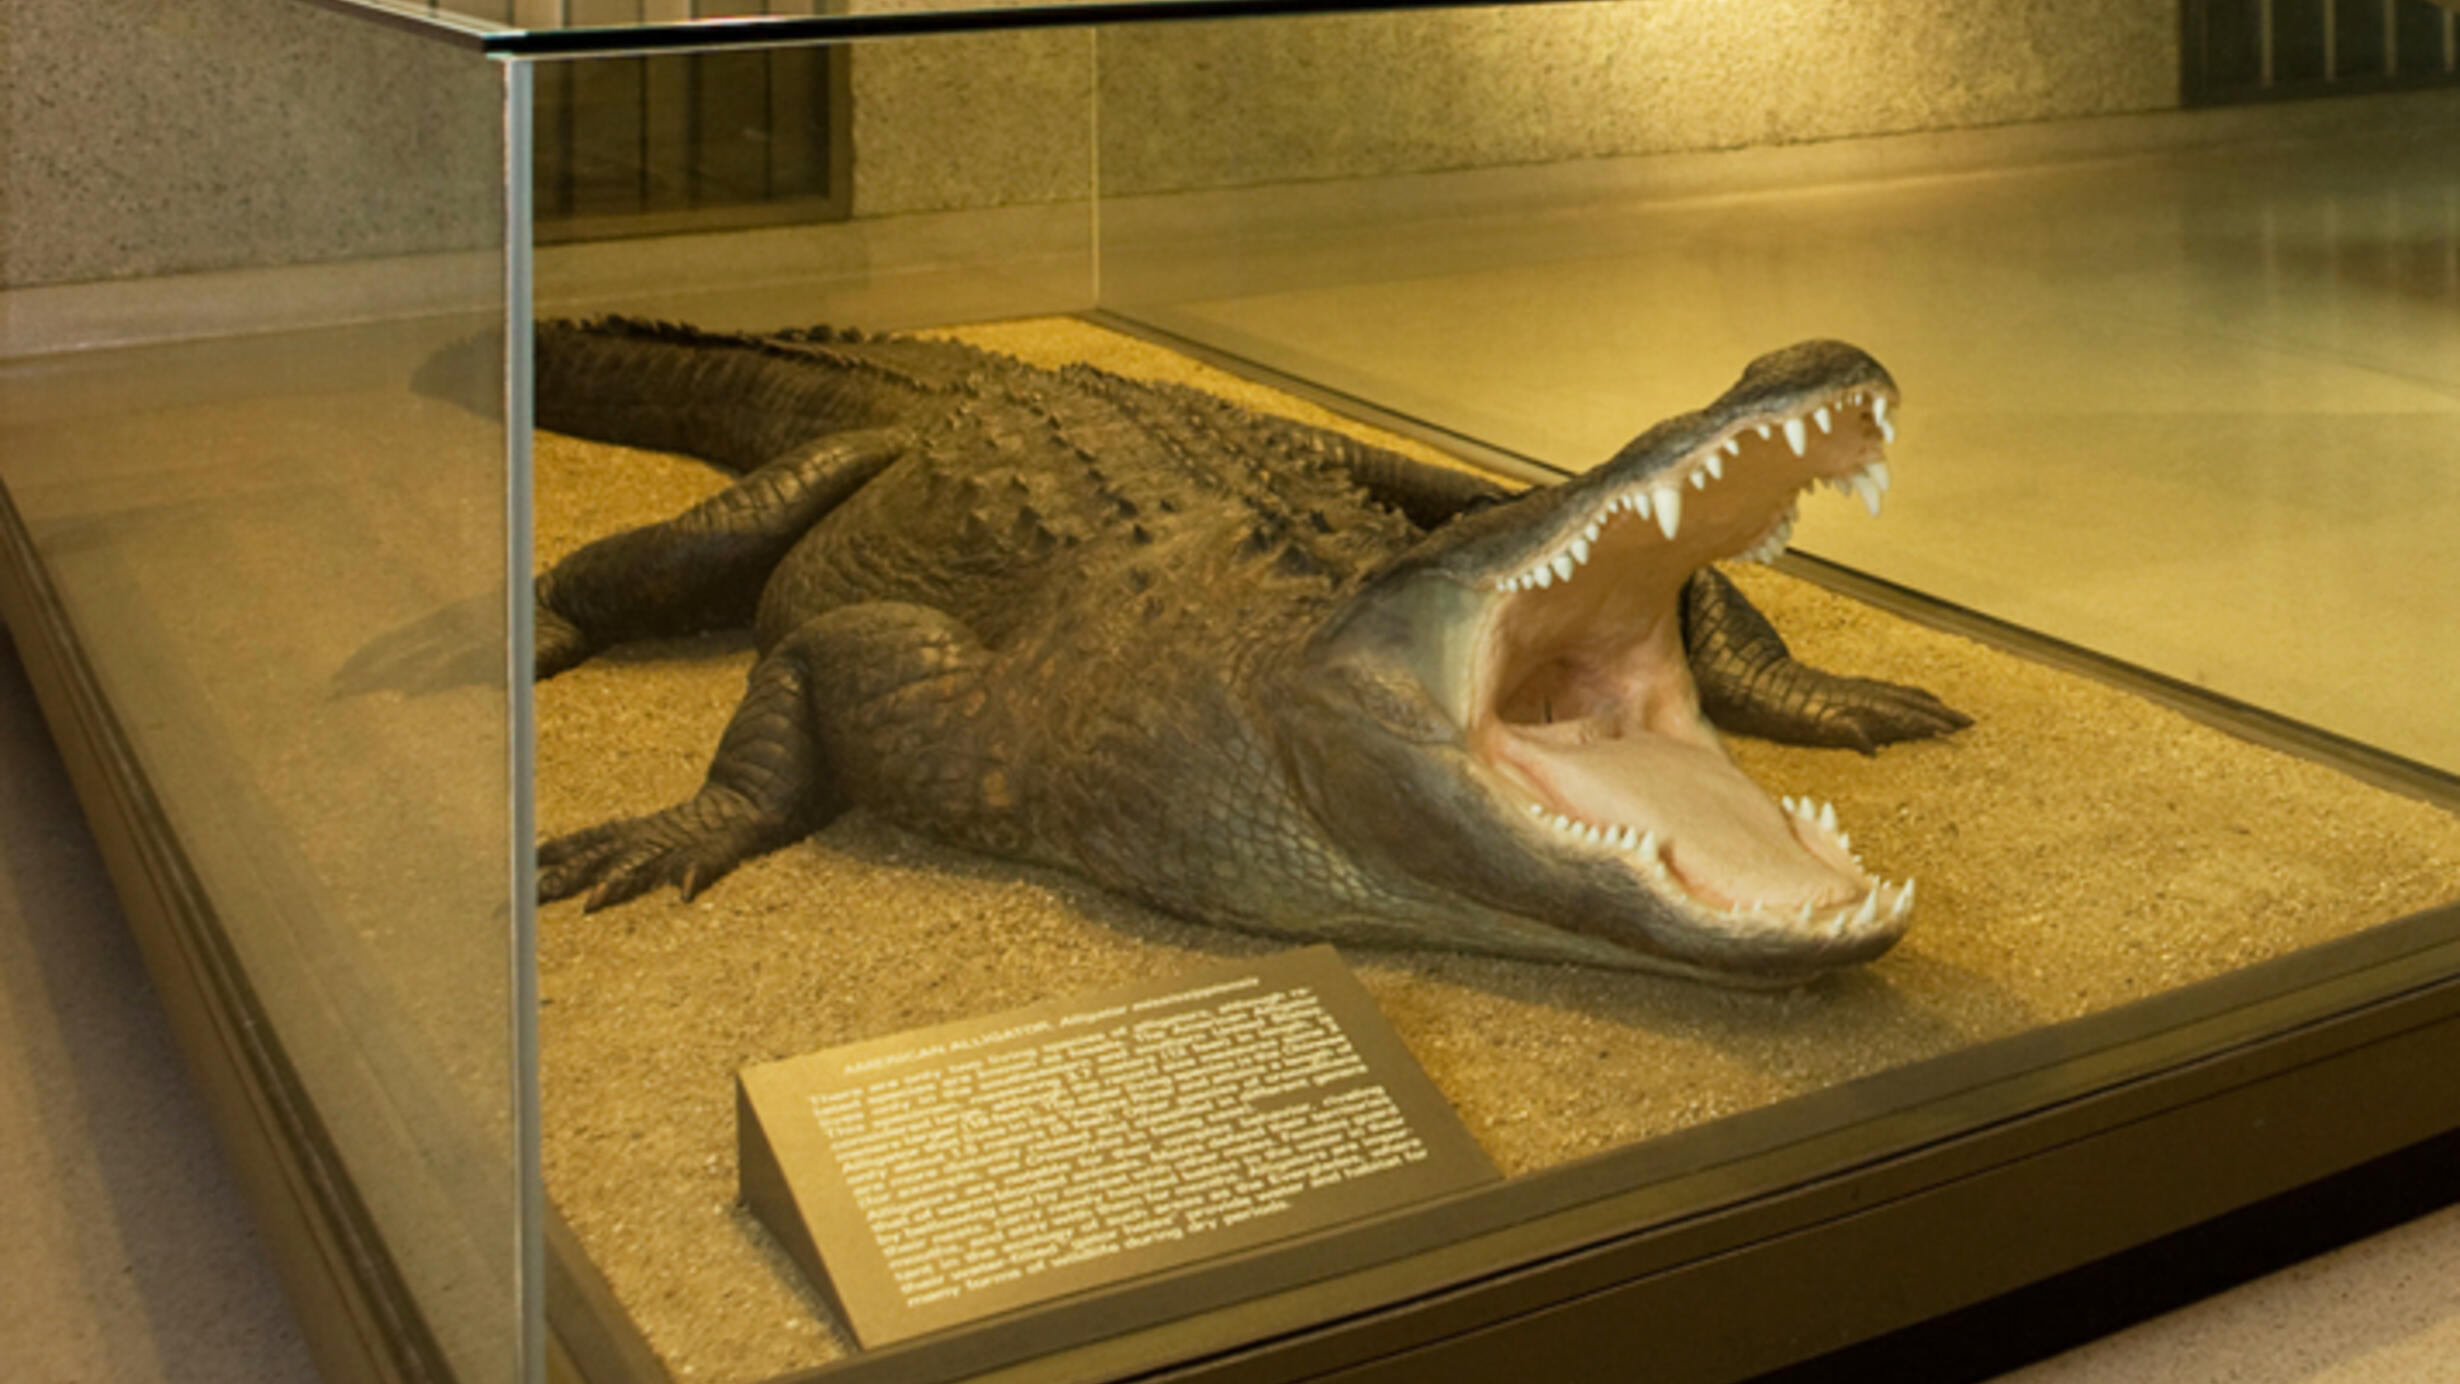 In the Hall of Reptiles and Amphibians, the Museum's American alligator is shown in a glass case,  its jaws open wide to reveal sharp teeth.